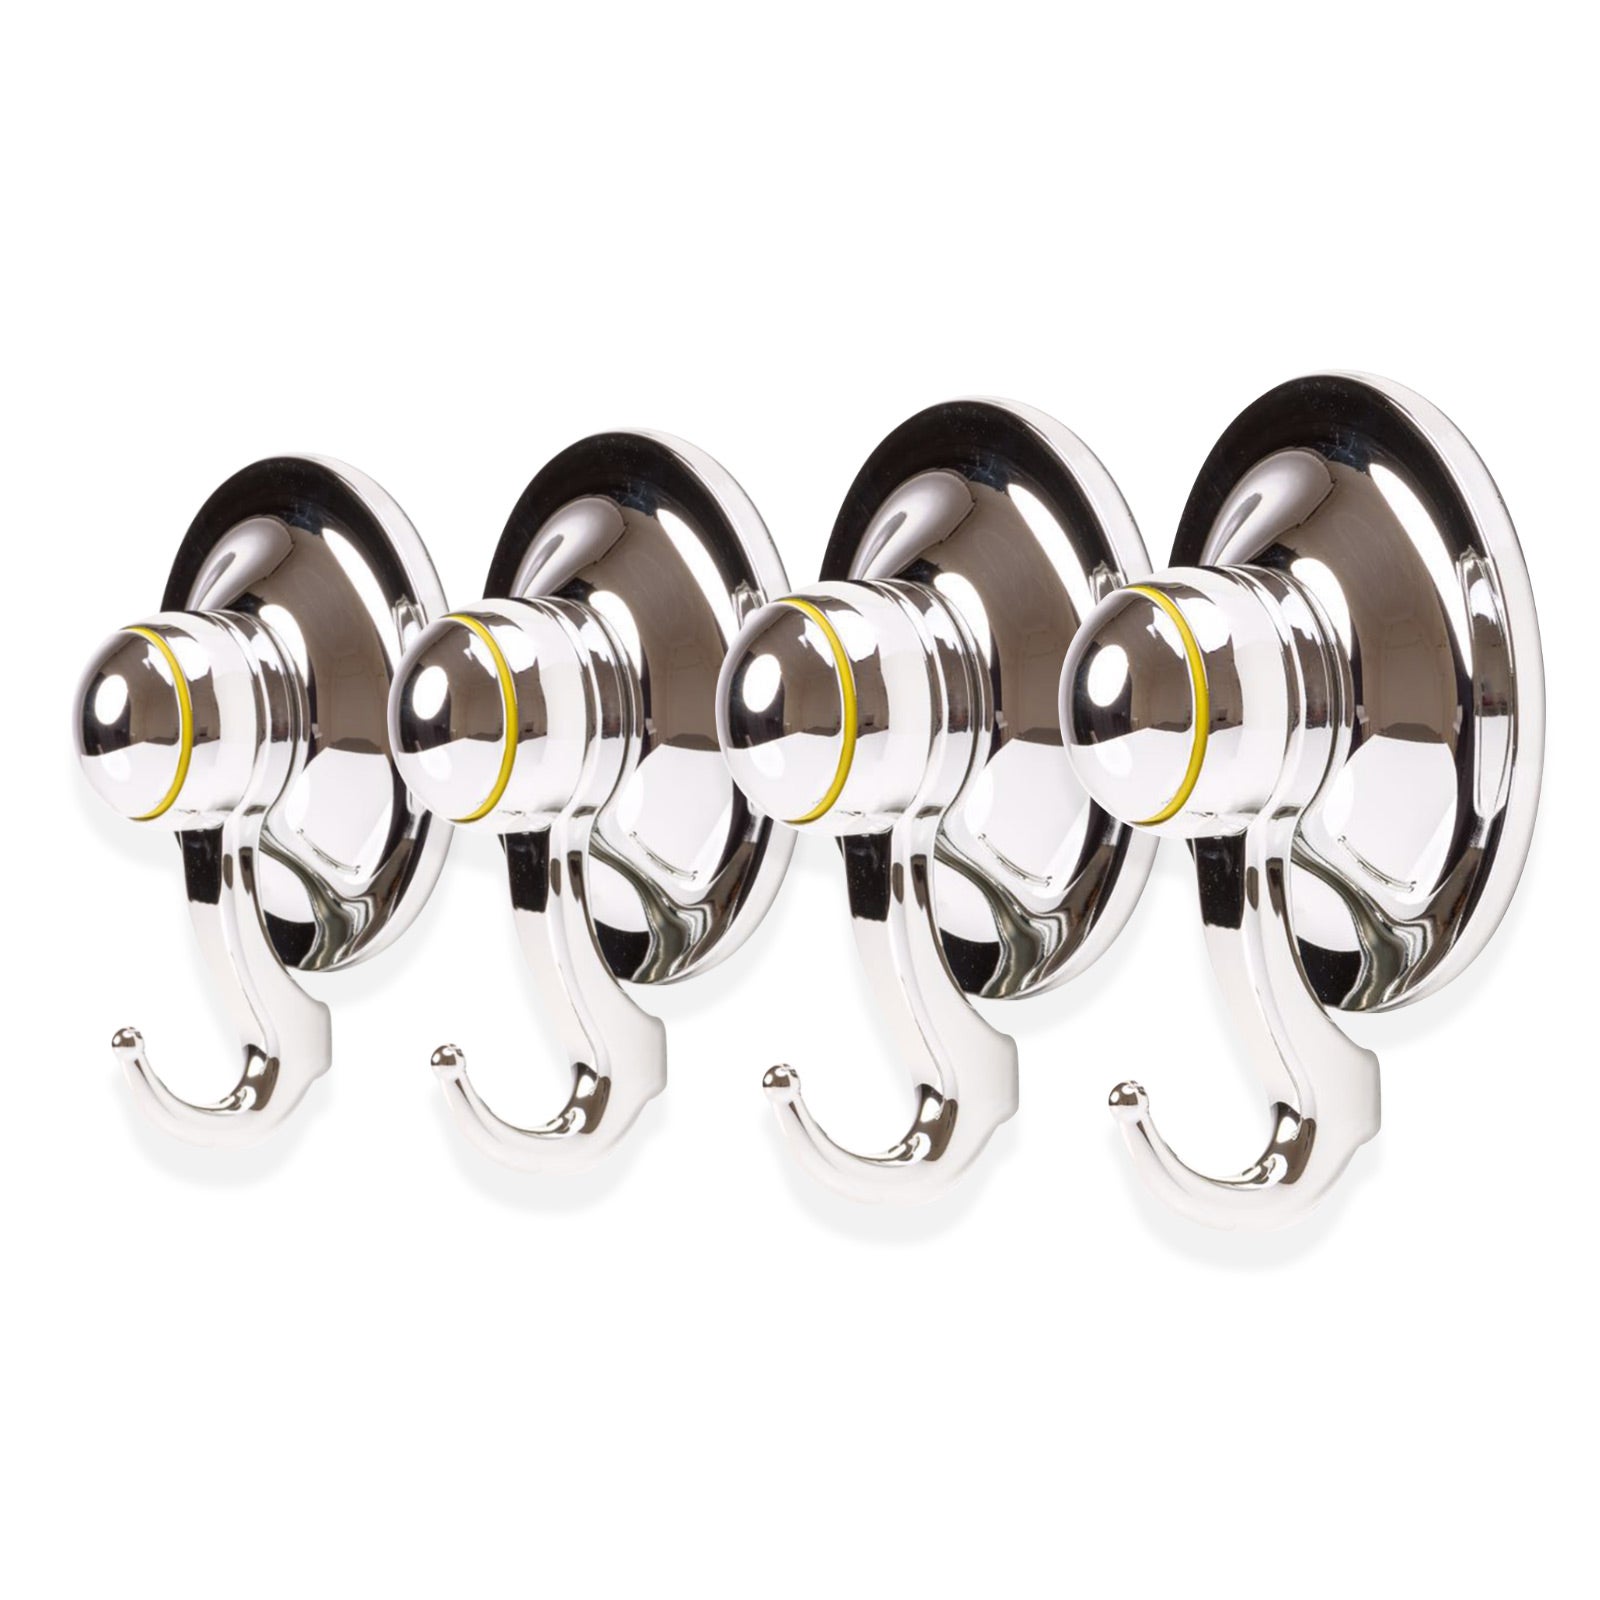 4PC Suction Hook Removable 72mm CHROME 